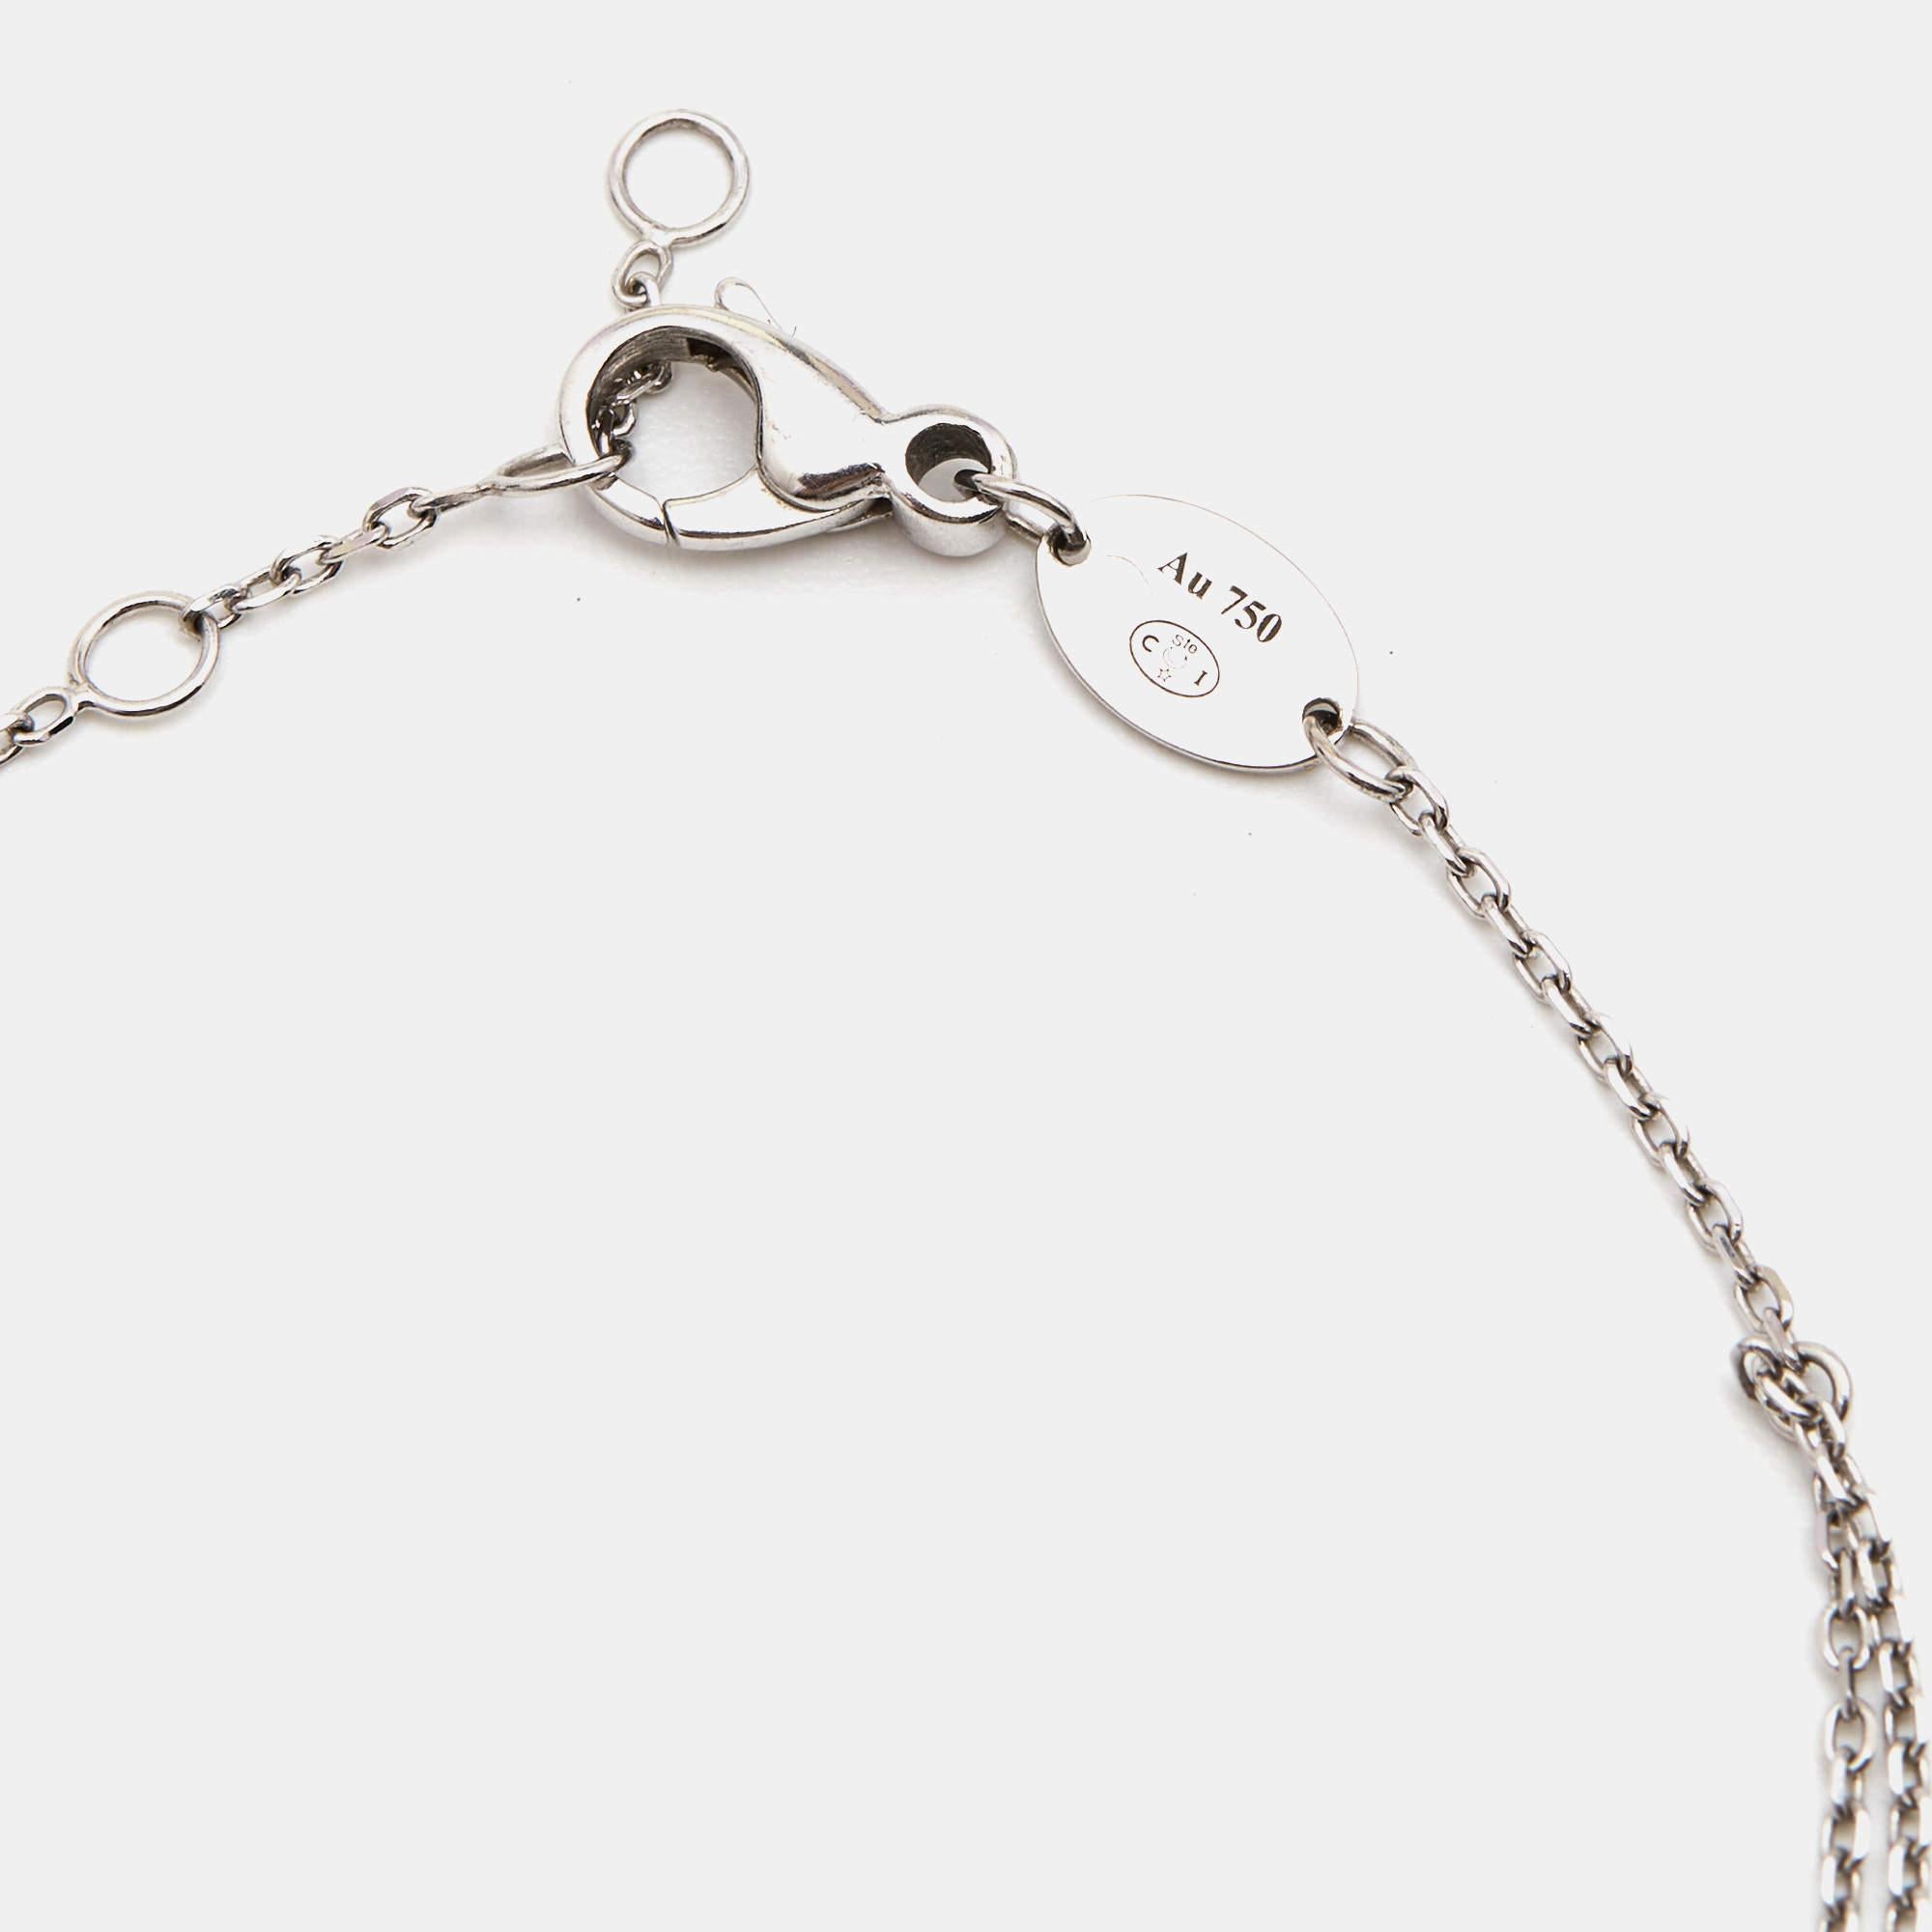 This gorgeous Chaumet bracelet has been created by skilled craftsmen to be a cherishable accessory. The Jeux de Liens bracelet is sculpted using 18k white gold and designed with double chains that hold the signature ''X' motif inlaid with mother of